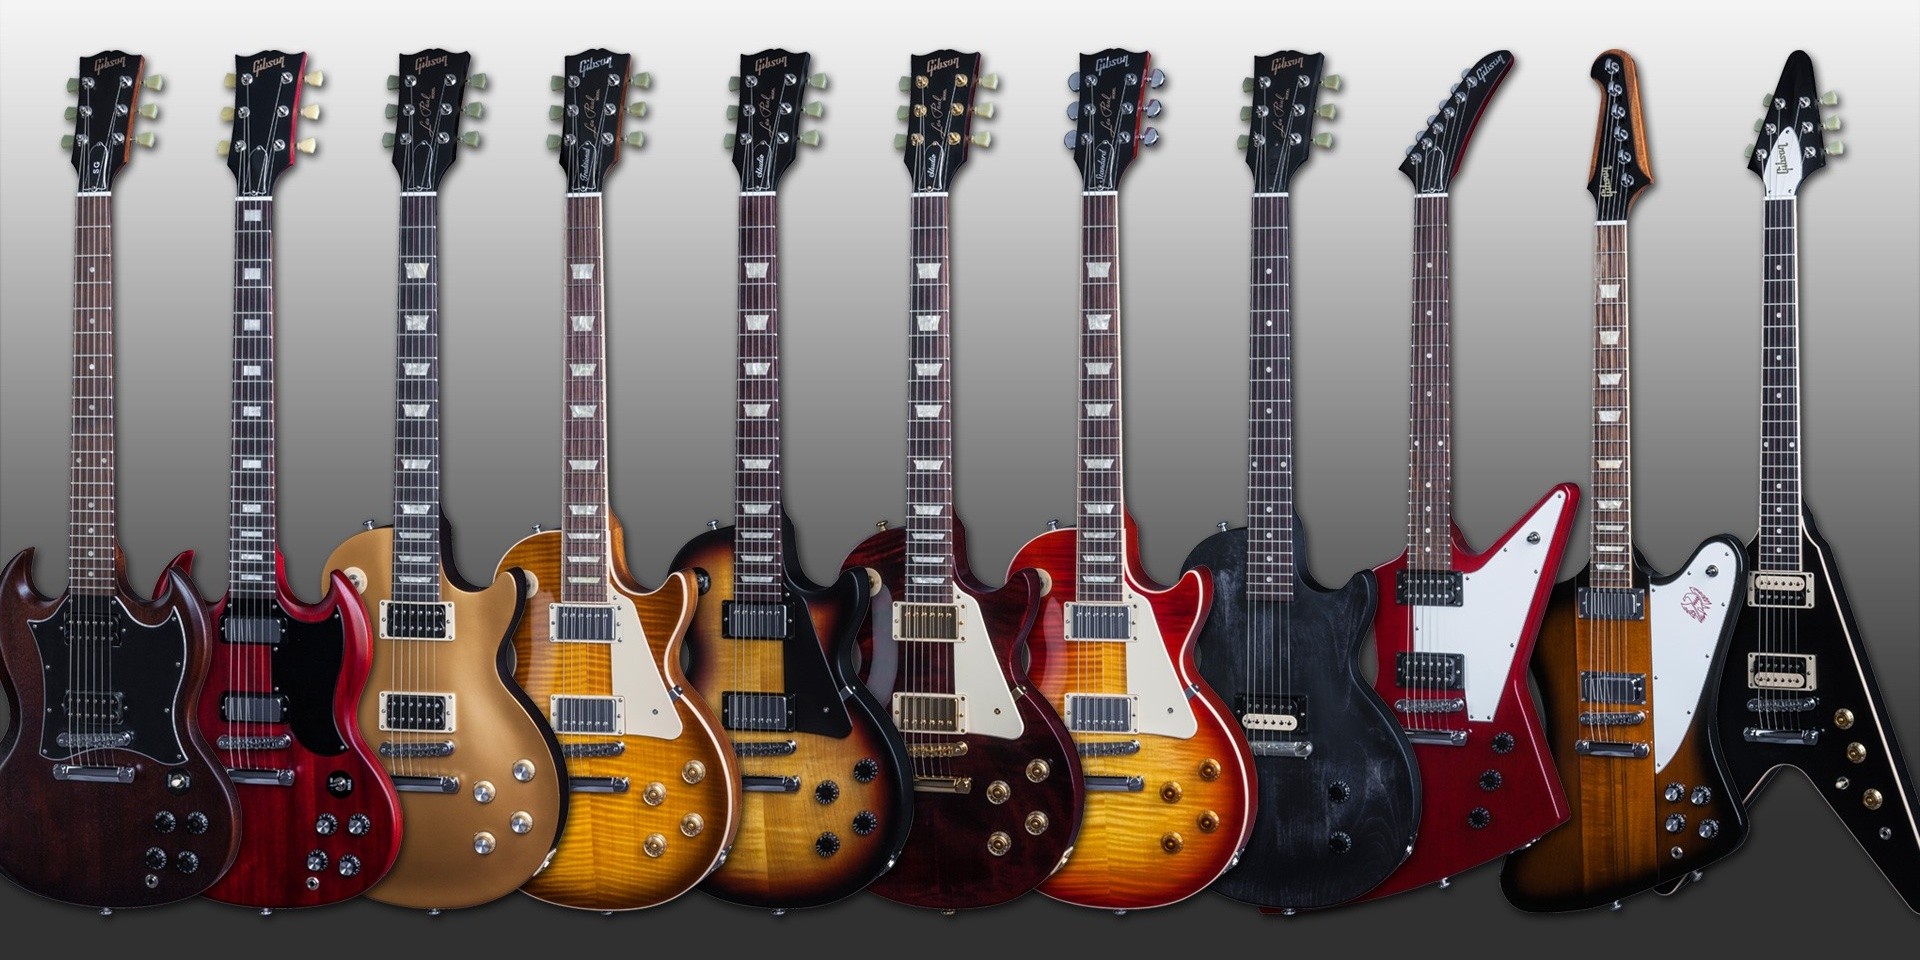 Gibson Guitars bounces back from bankruptcy 